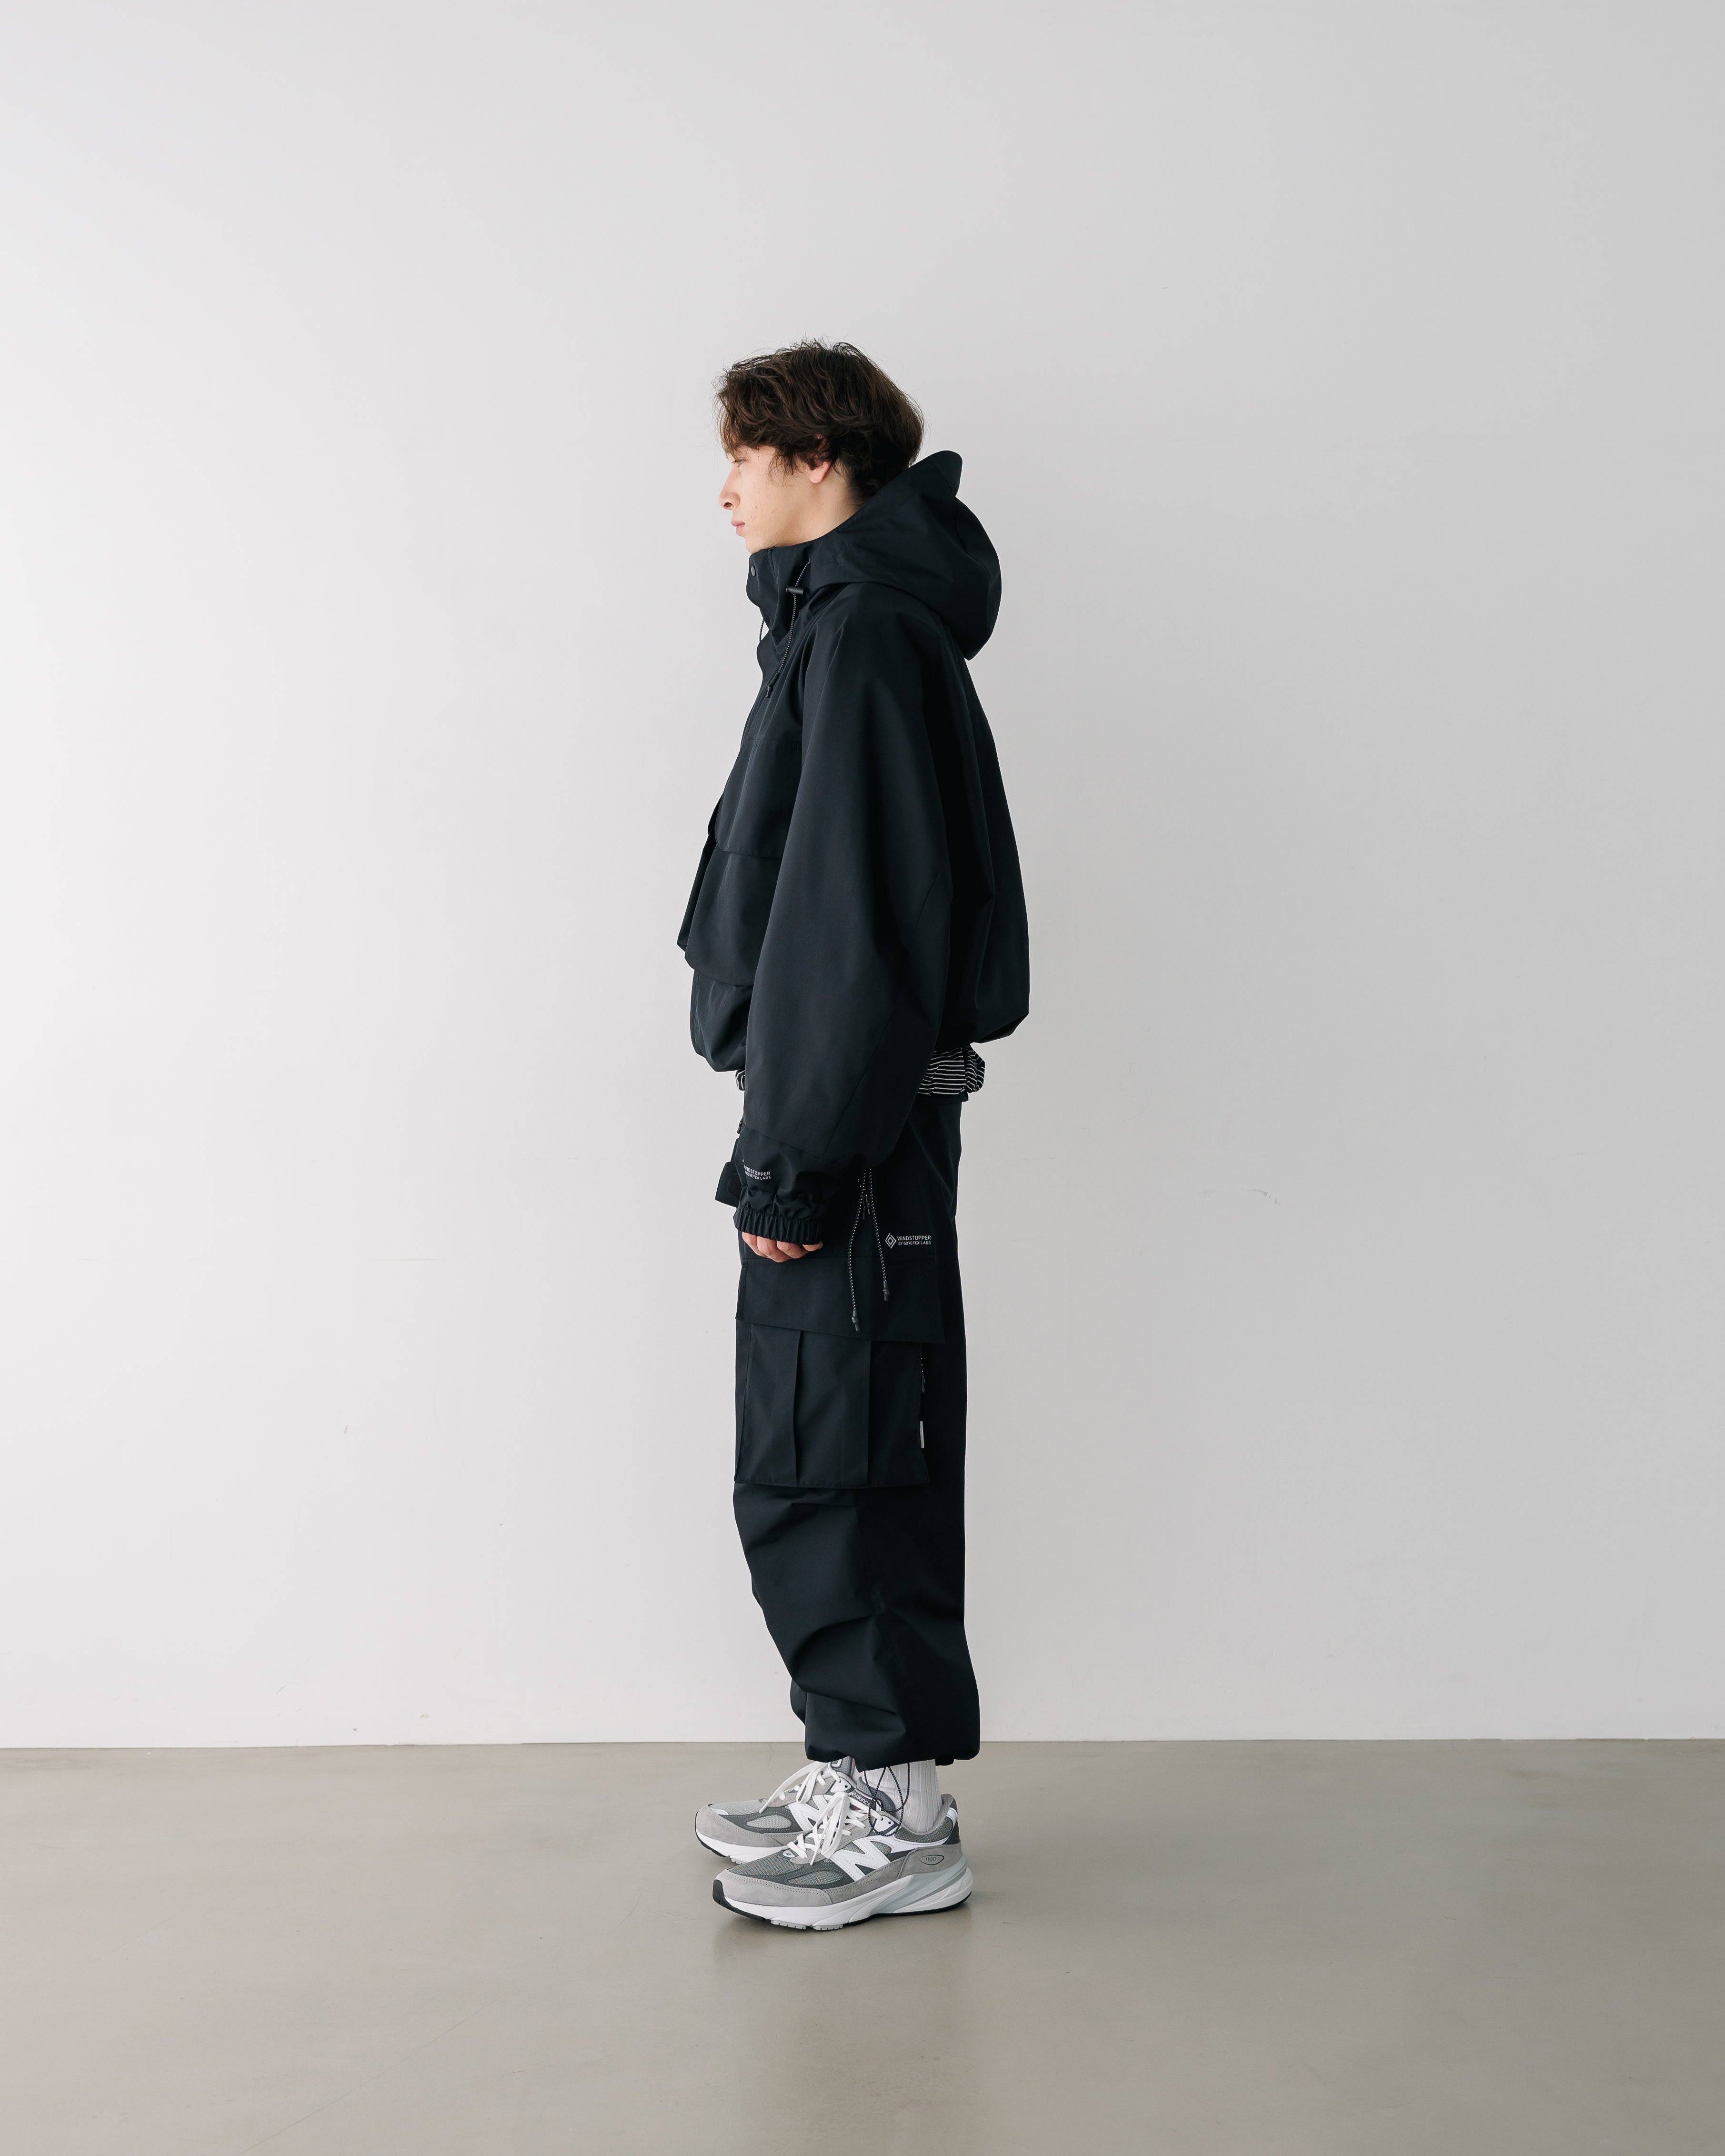 3.6 wed 20:00- Pre-order】+phenix WINDSTOPPER® by GORE-TEX LABS CITY W